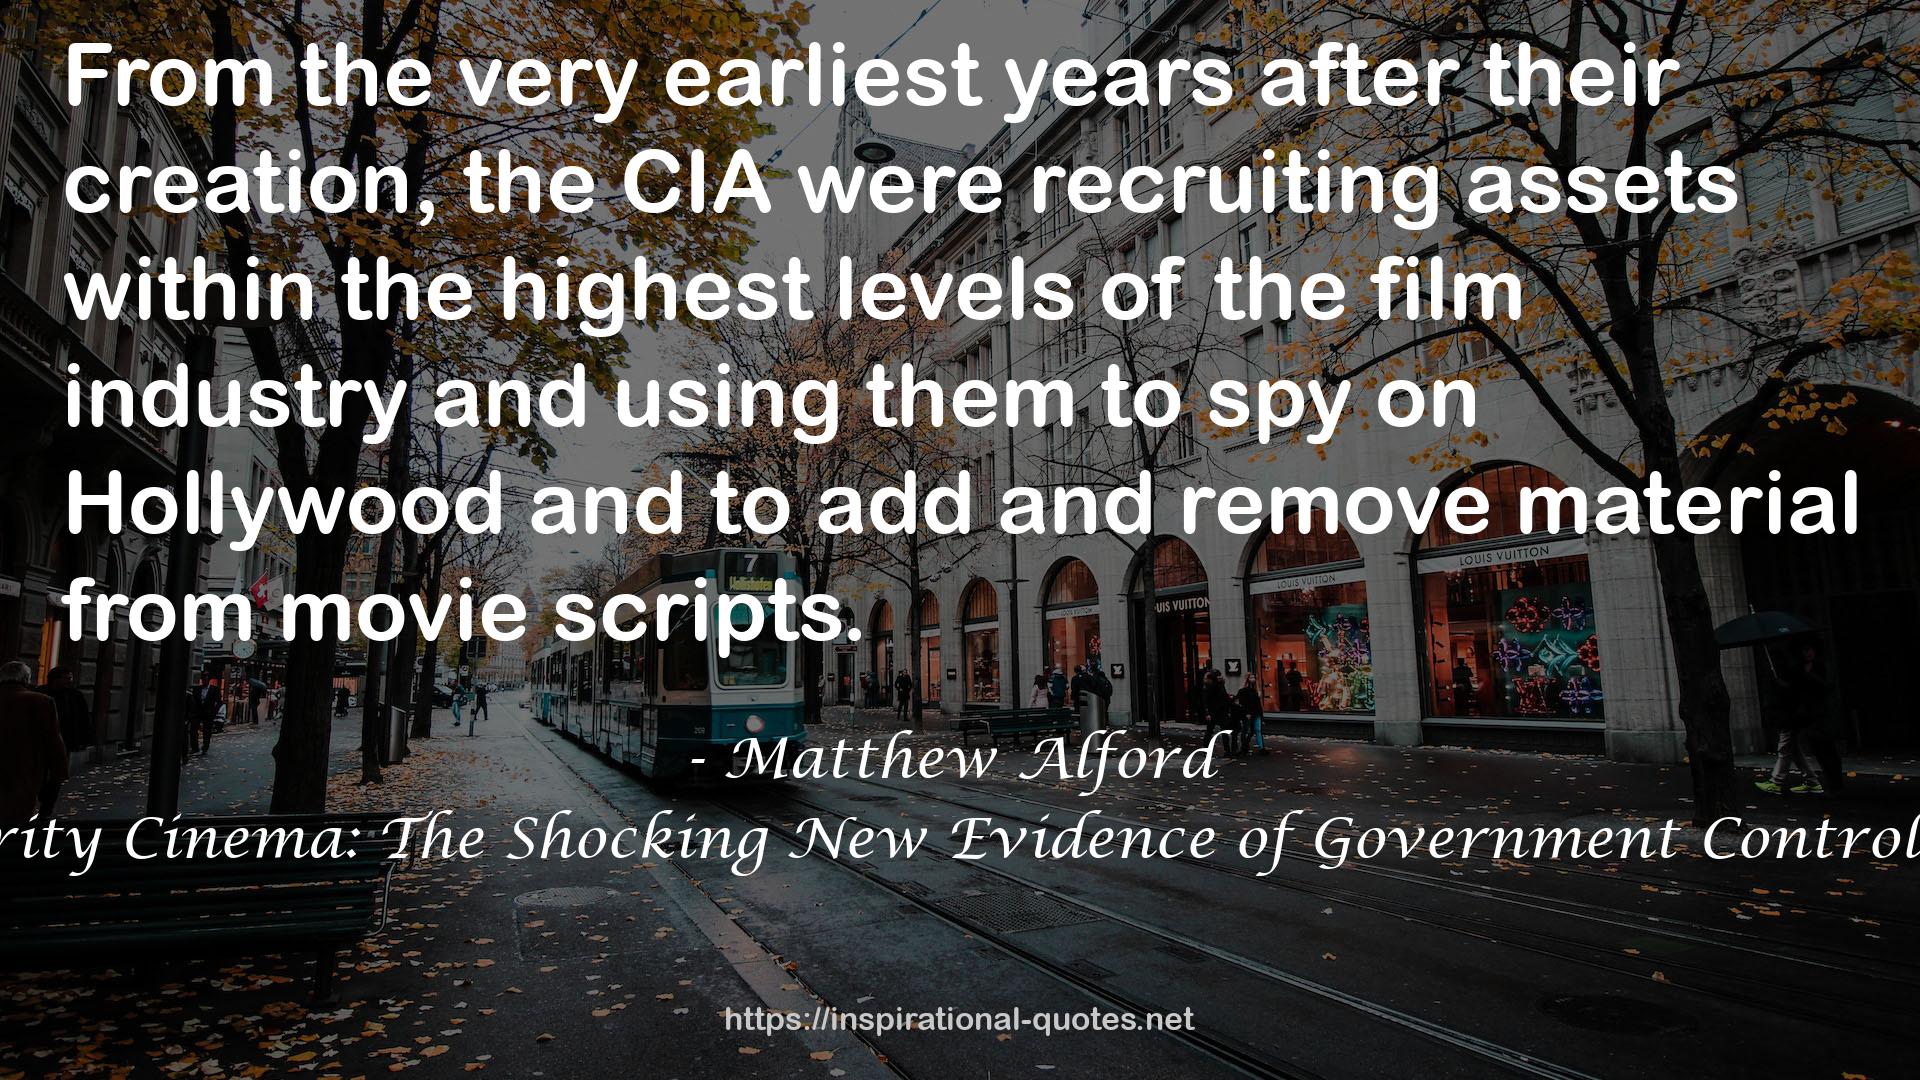 National Security Cinema: The Shocking New Evidence of Government Control in Hollywood QUOTES